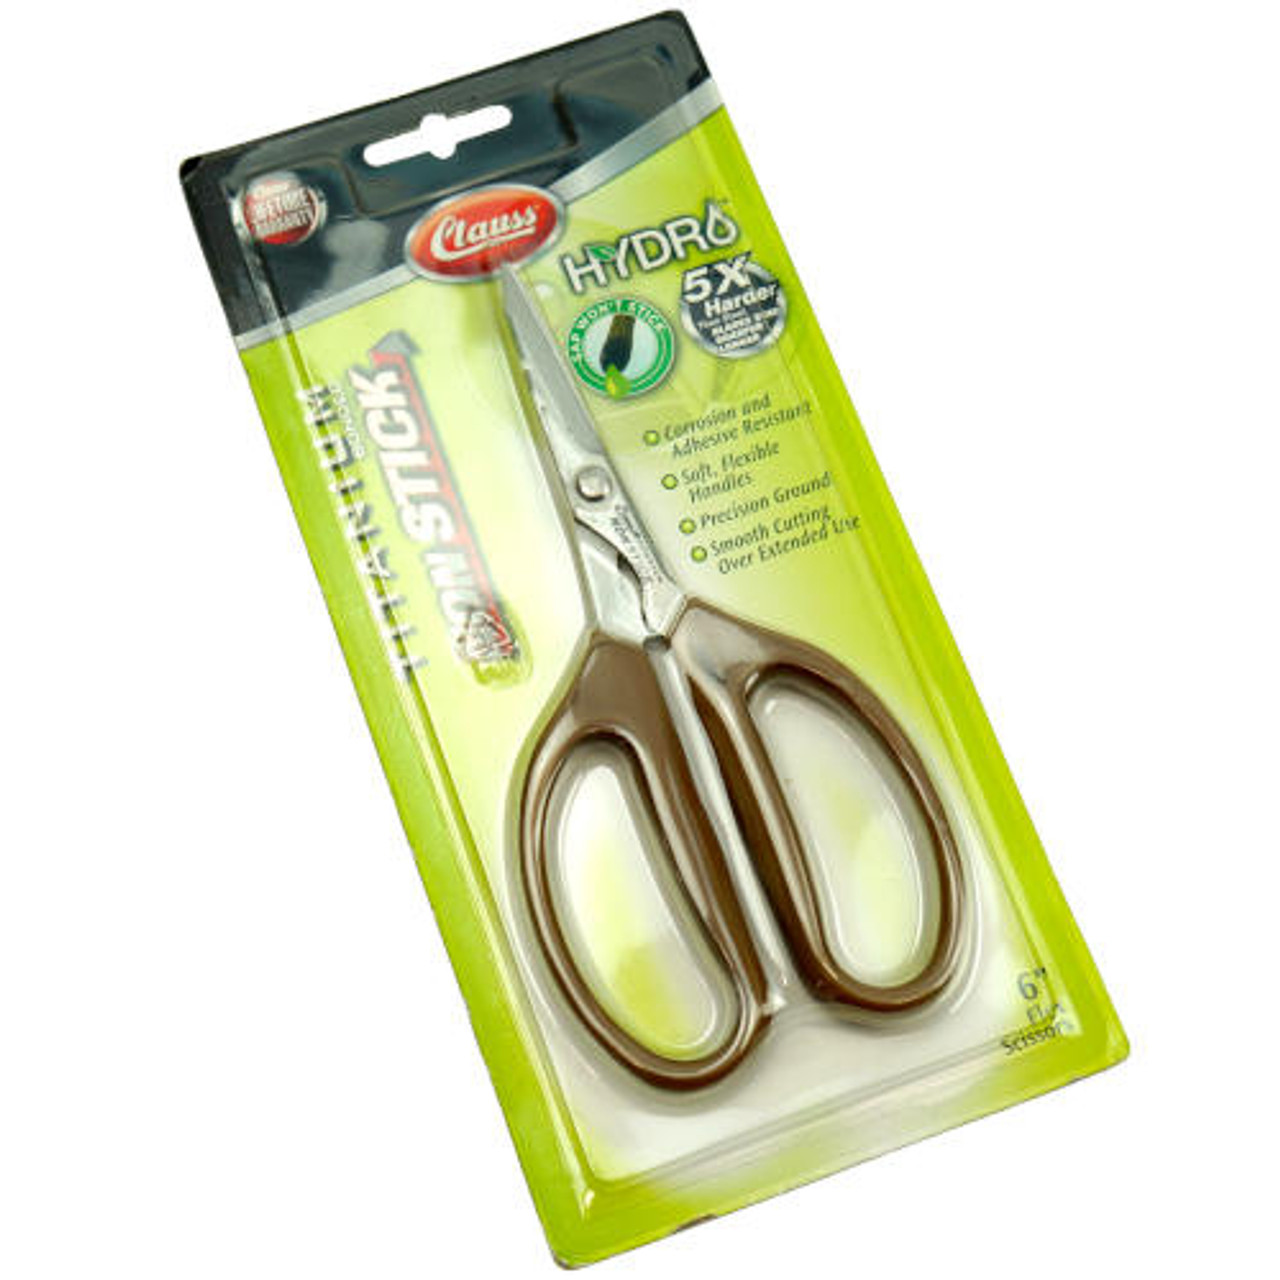 Strong Titanium Reinforced House Hold Scissors – World wide sales